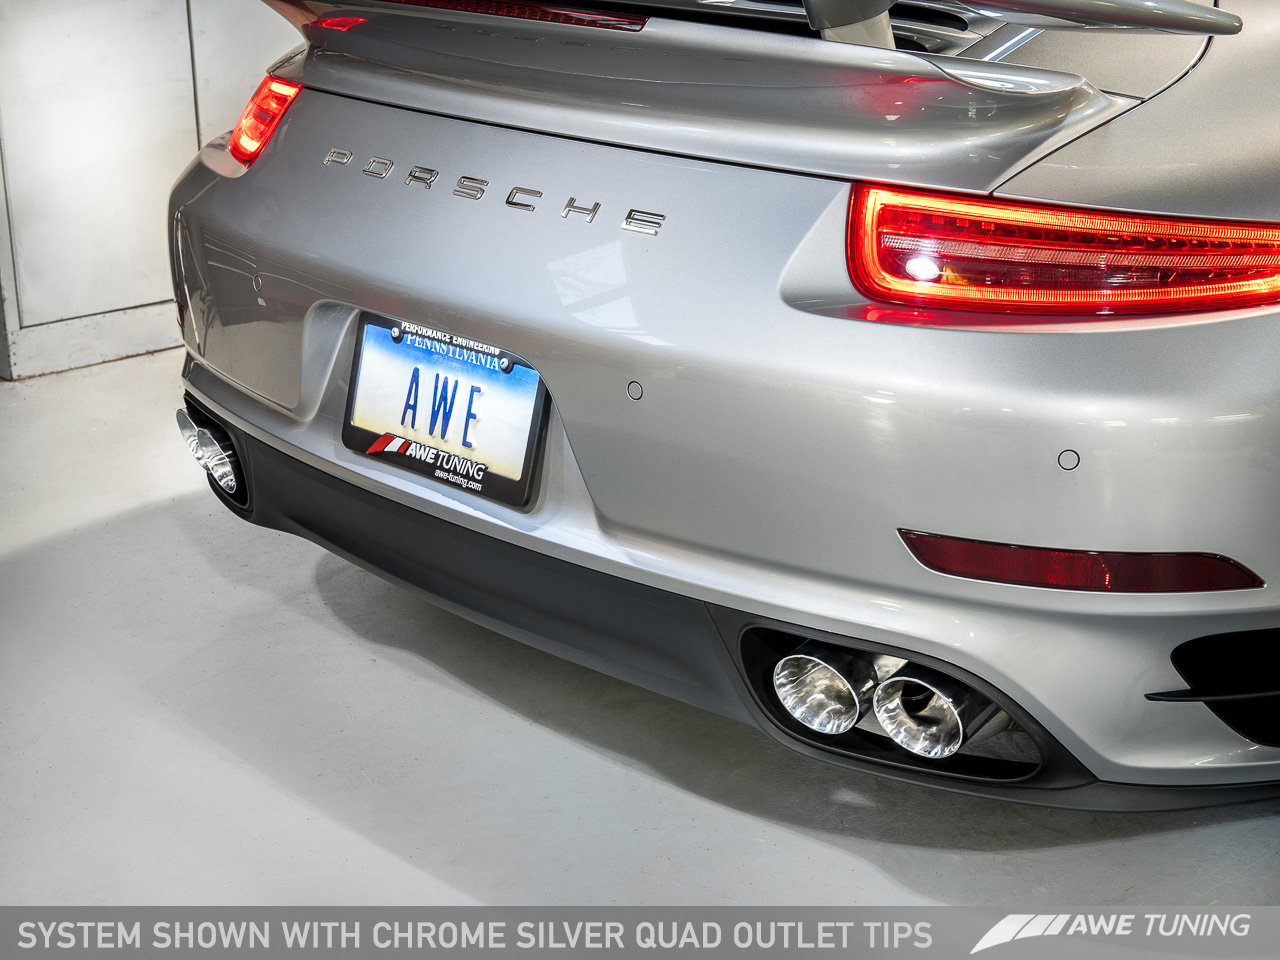 AWE Performance Exhaust and High-Flow Cat Sections for Porsche 991 Turbo - Chrome Silver Quad Tips